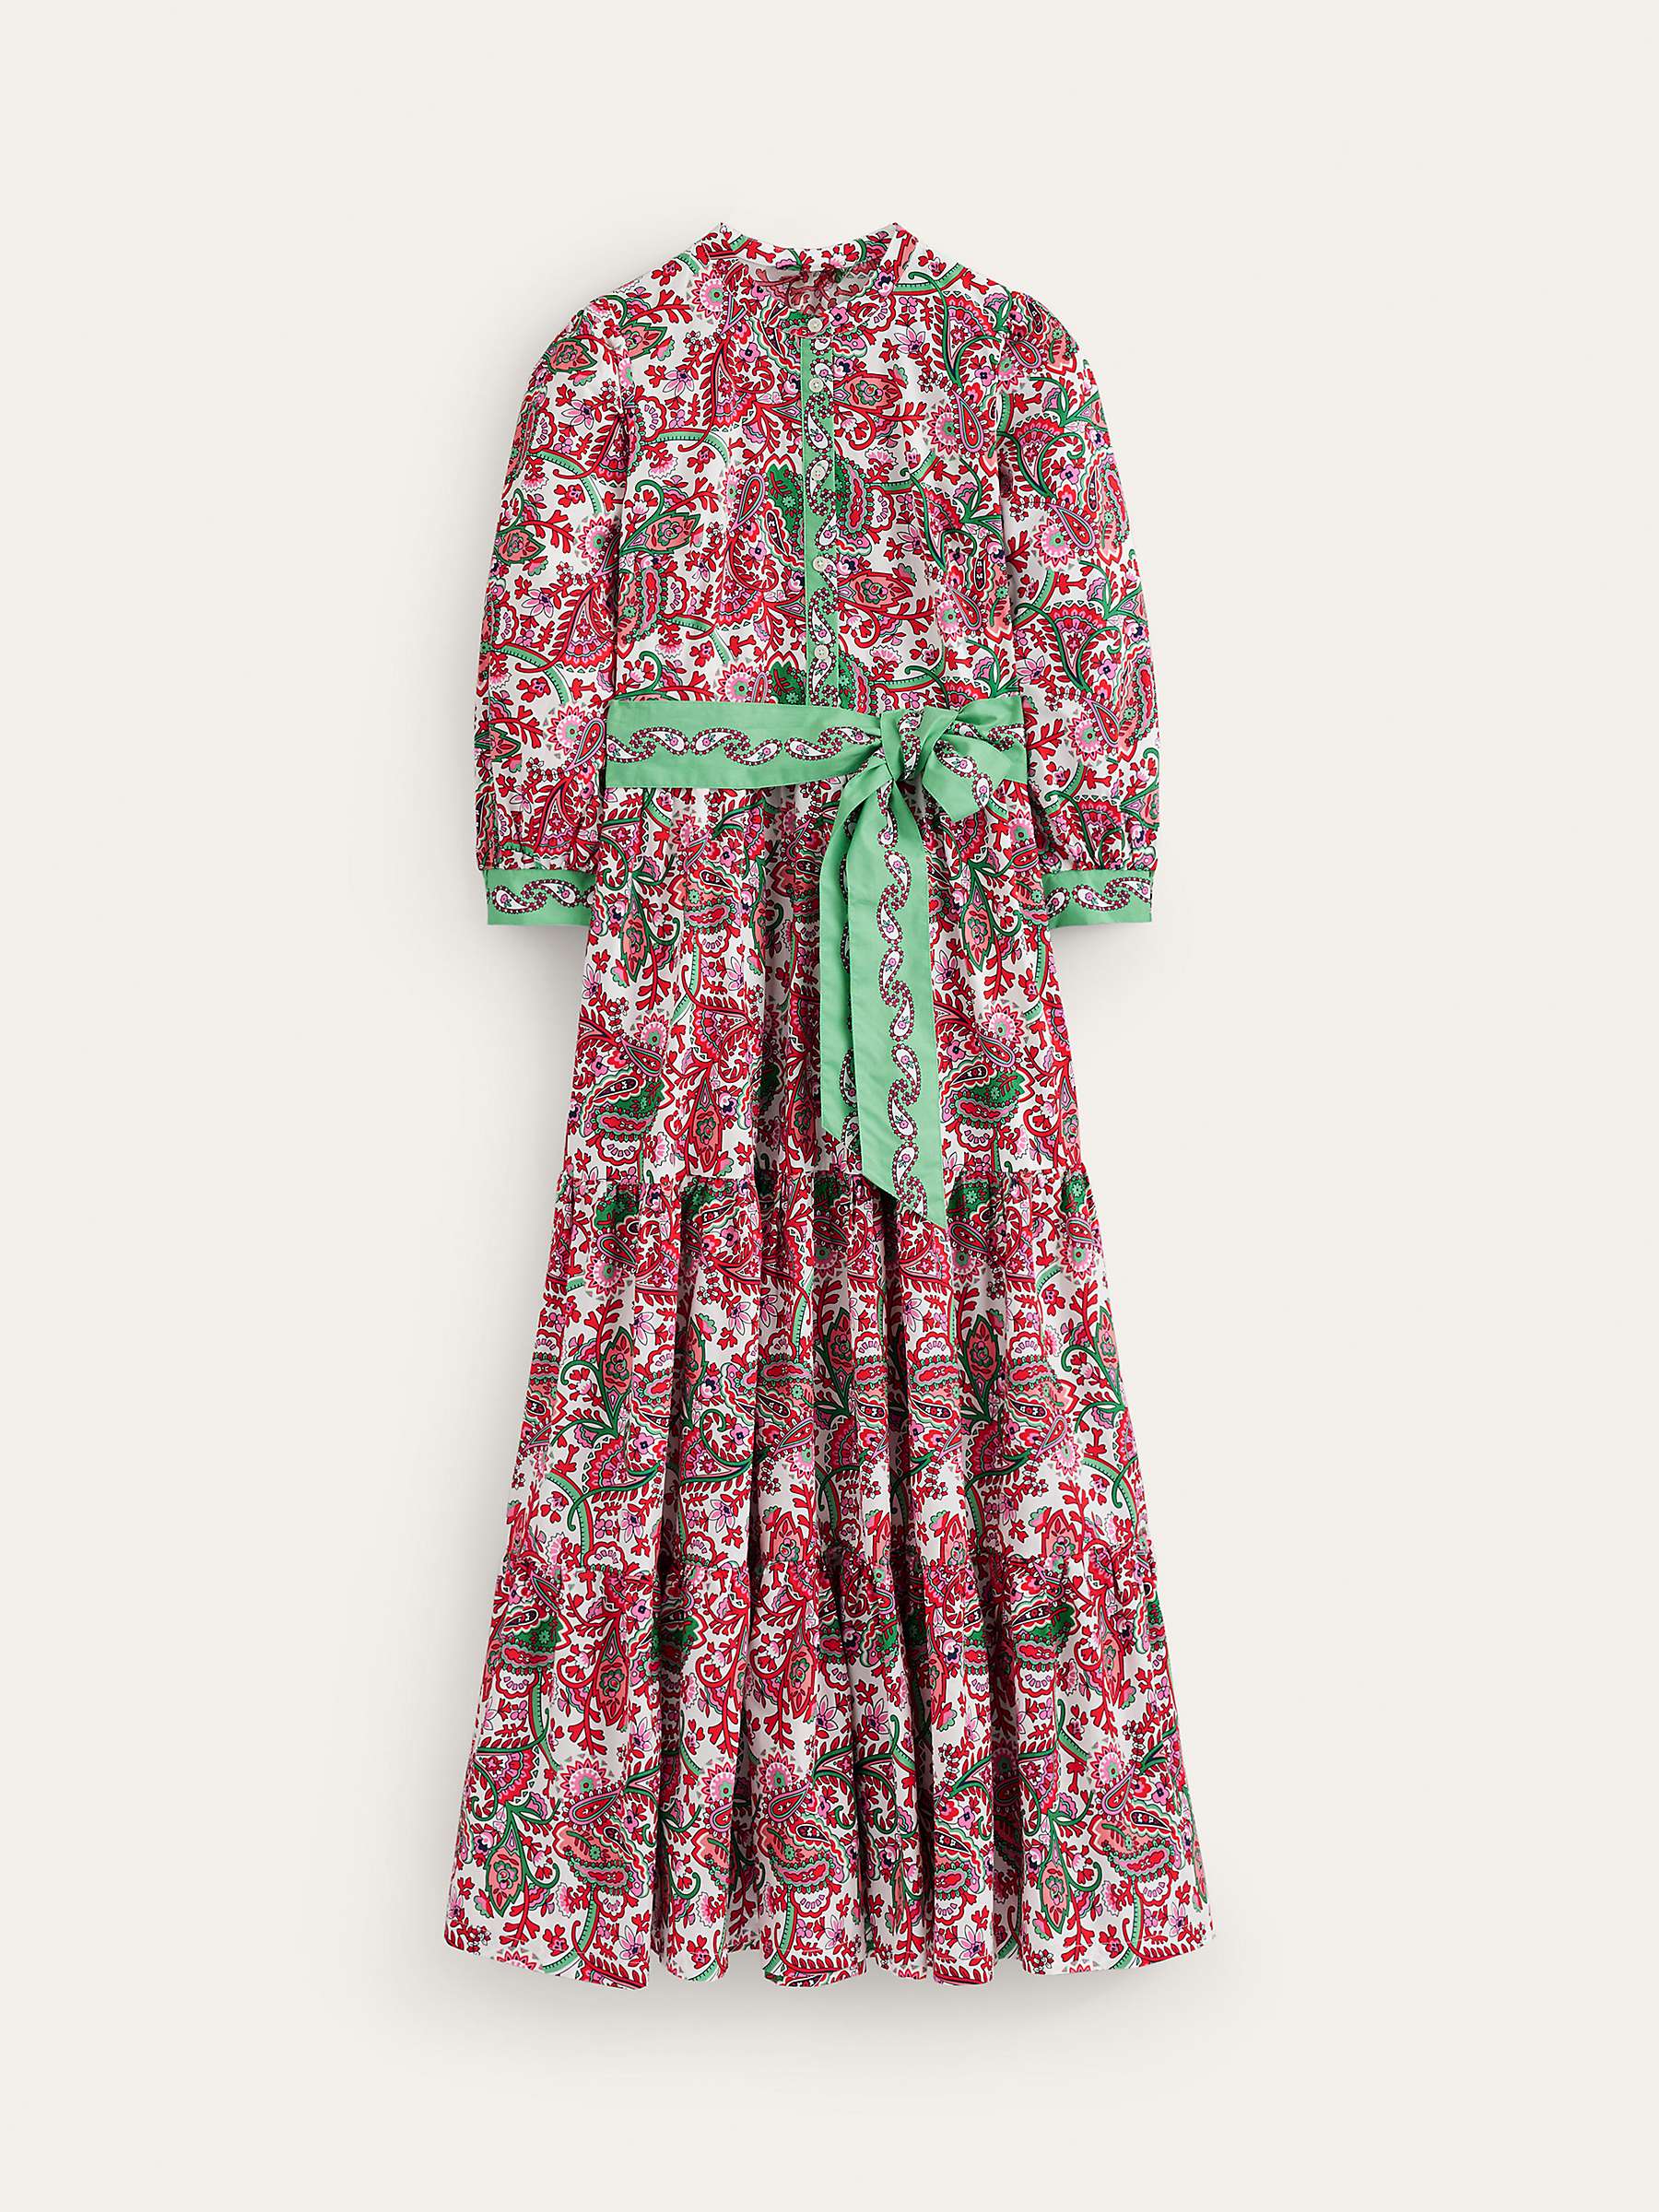 Buy Boden Alba Paisley Print Tiered Maxi Cotton Dress, Multi Online at johnlewis.com